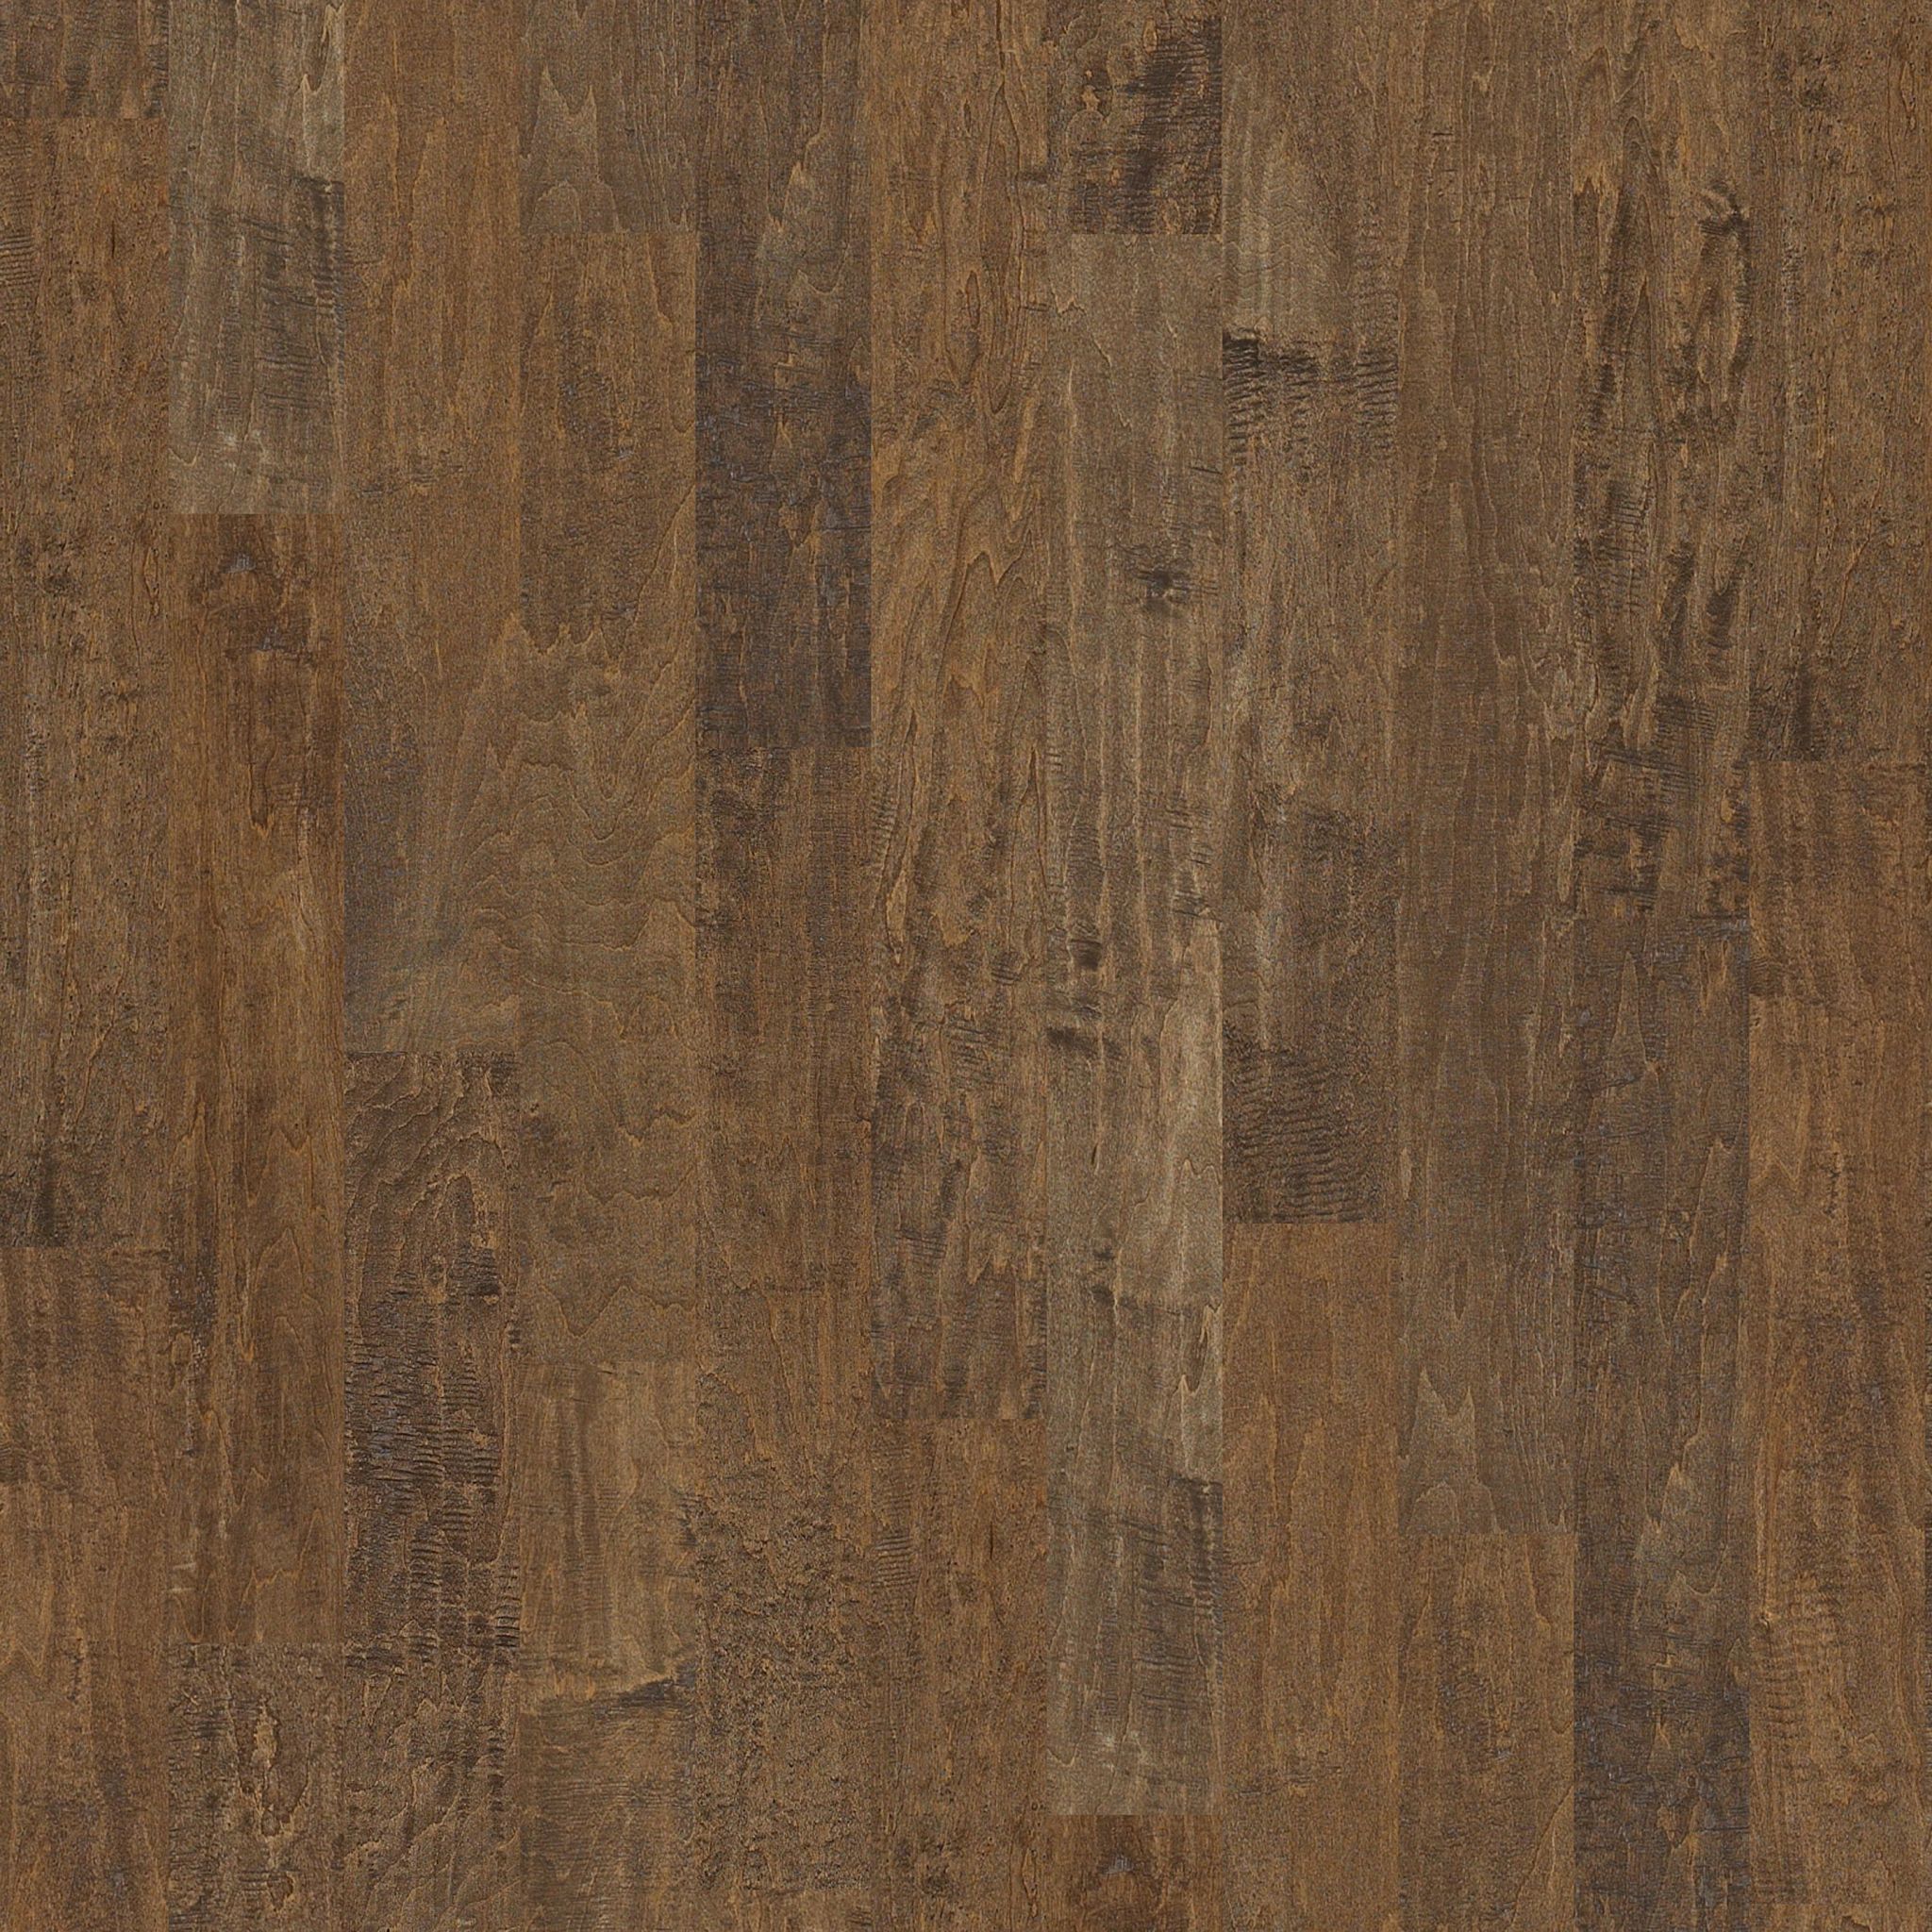 Style name and number: Yukon Maple 6 3/8″ SW548 and color name and number: Bison 03000